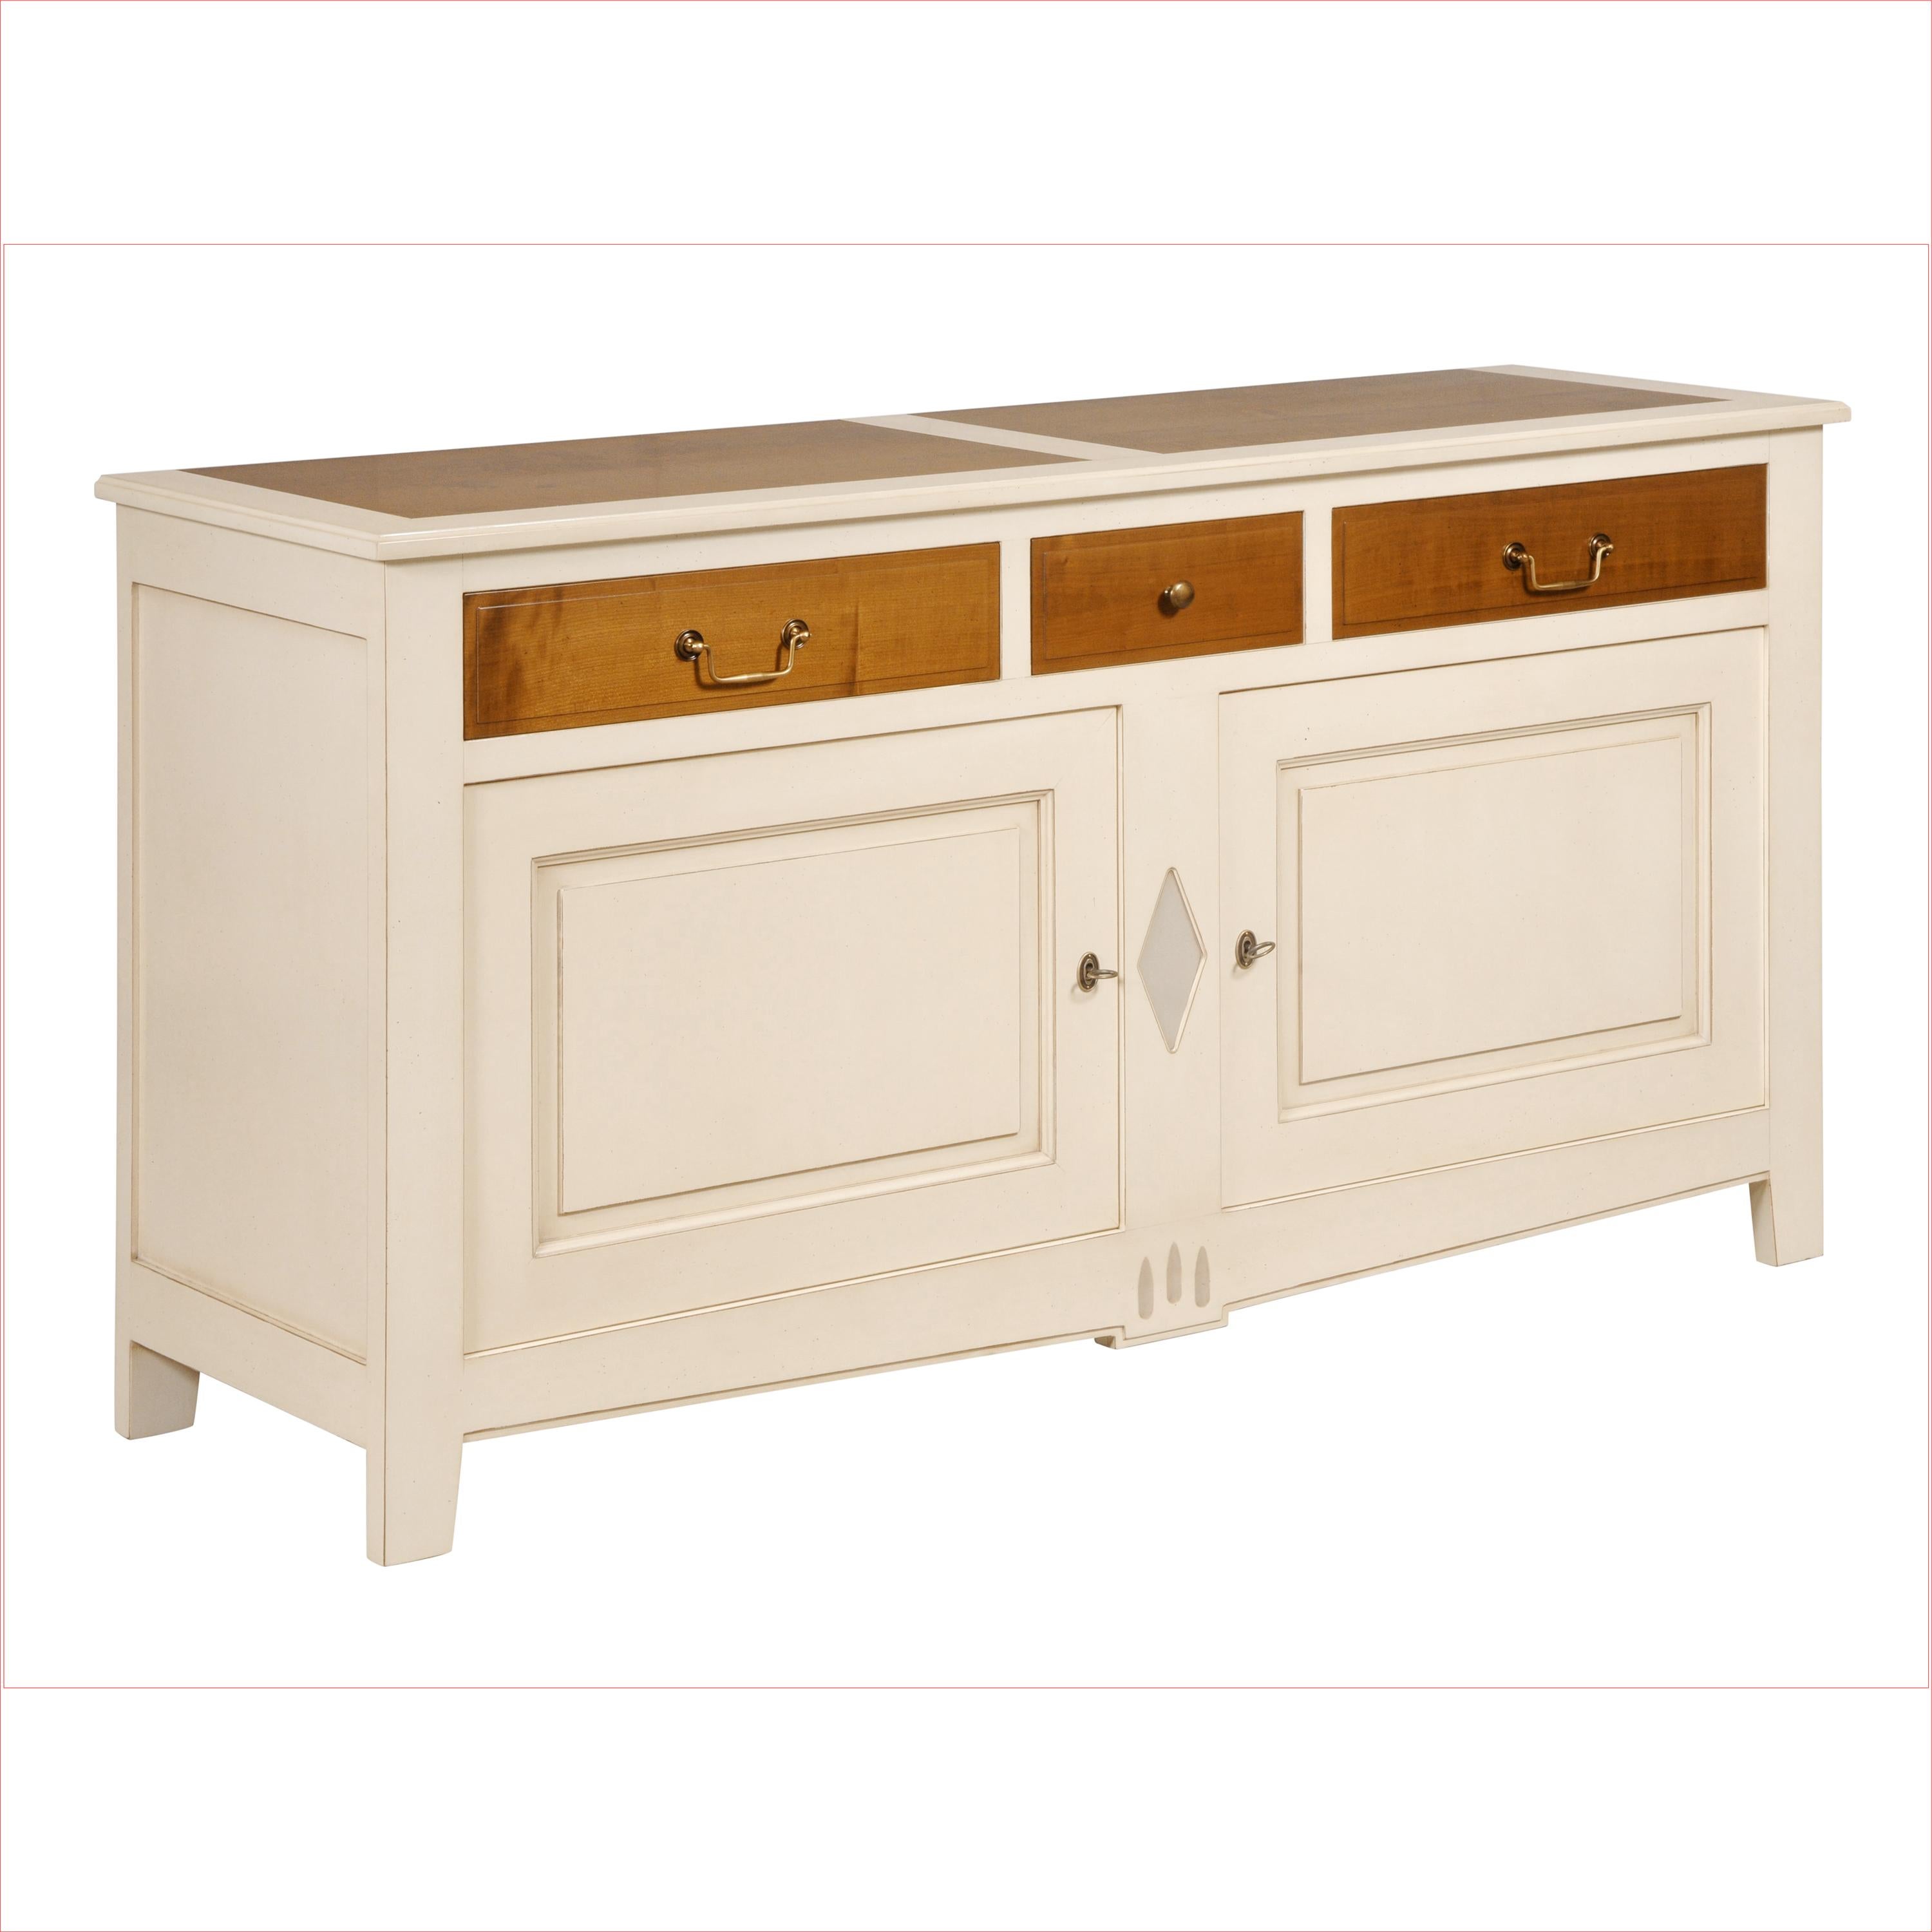 Contemporary French 2 Doors Classical White-Cream Lacquered Sideboard in Solid Cherry For Sale